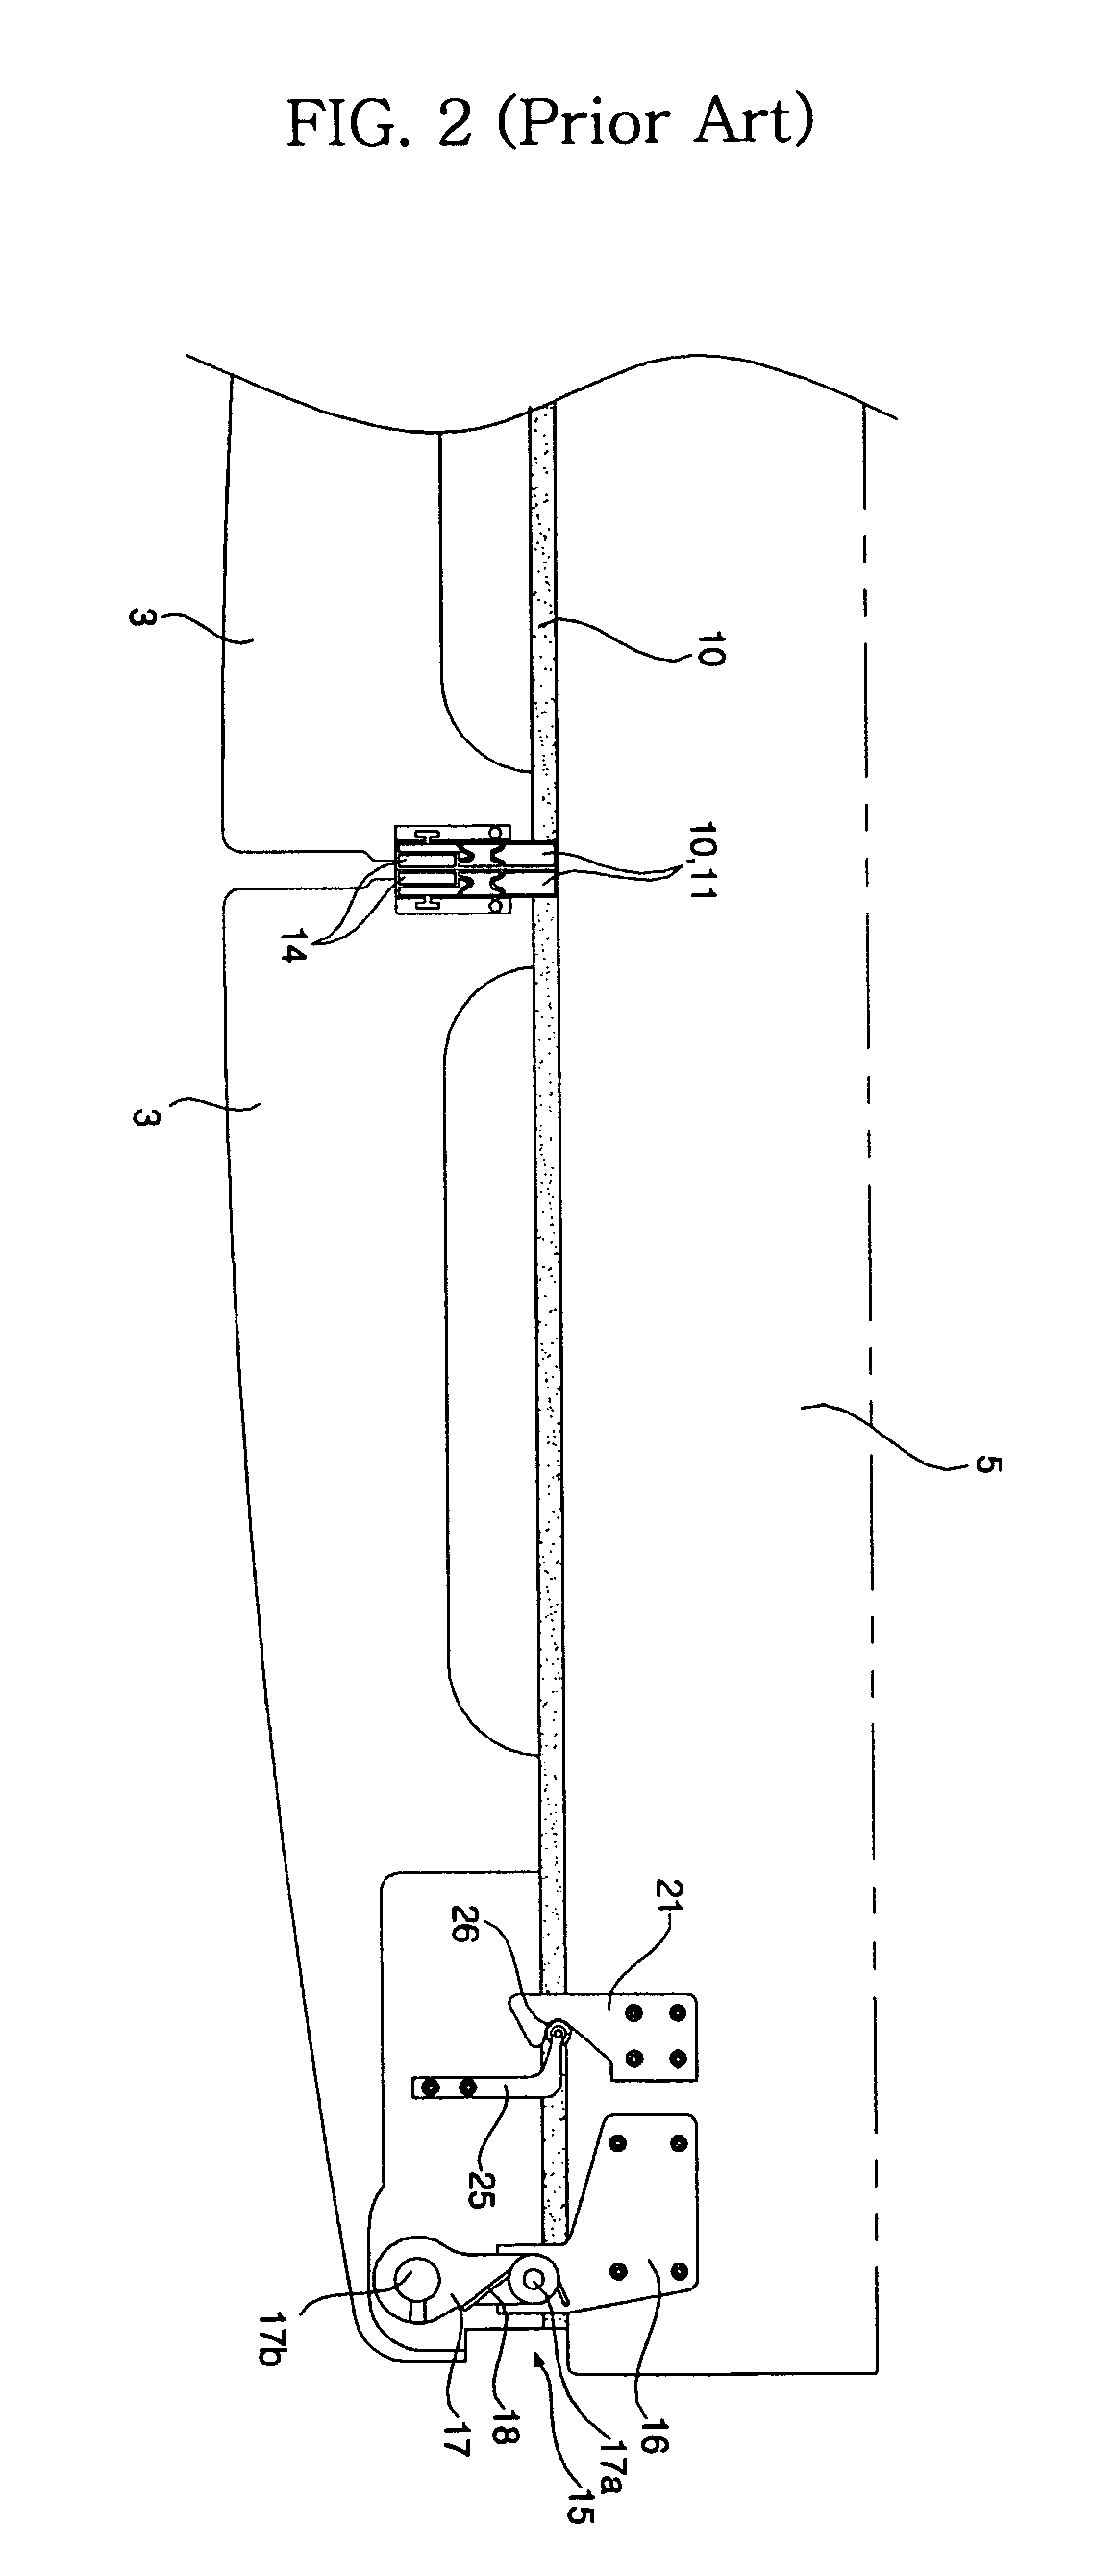 Door opening and closing device for refrigerator